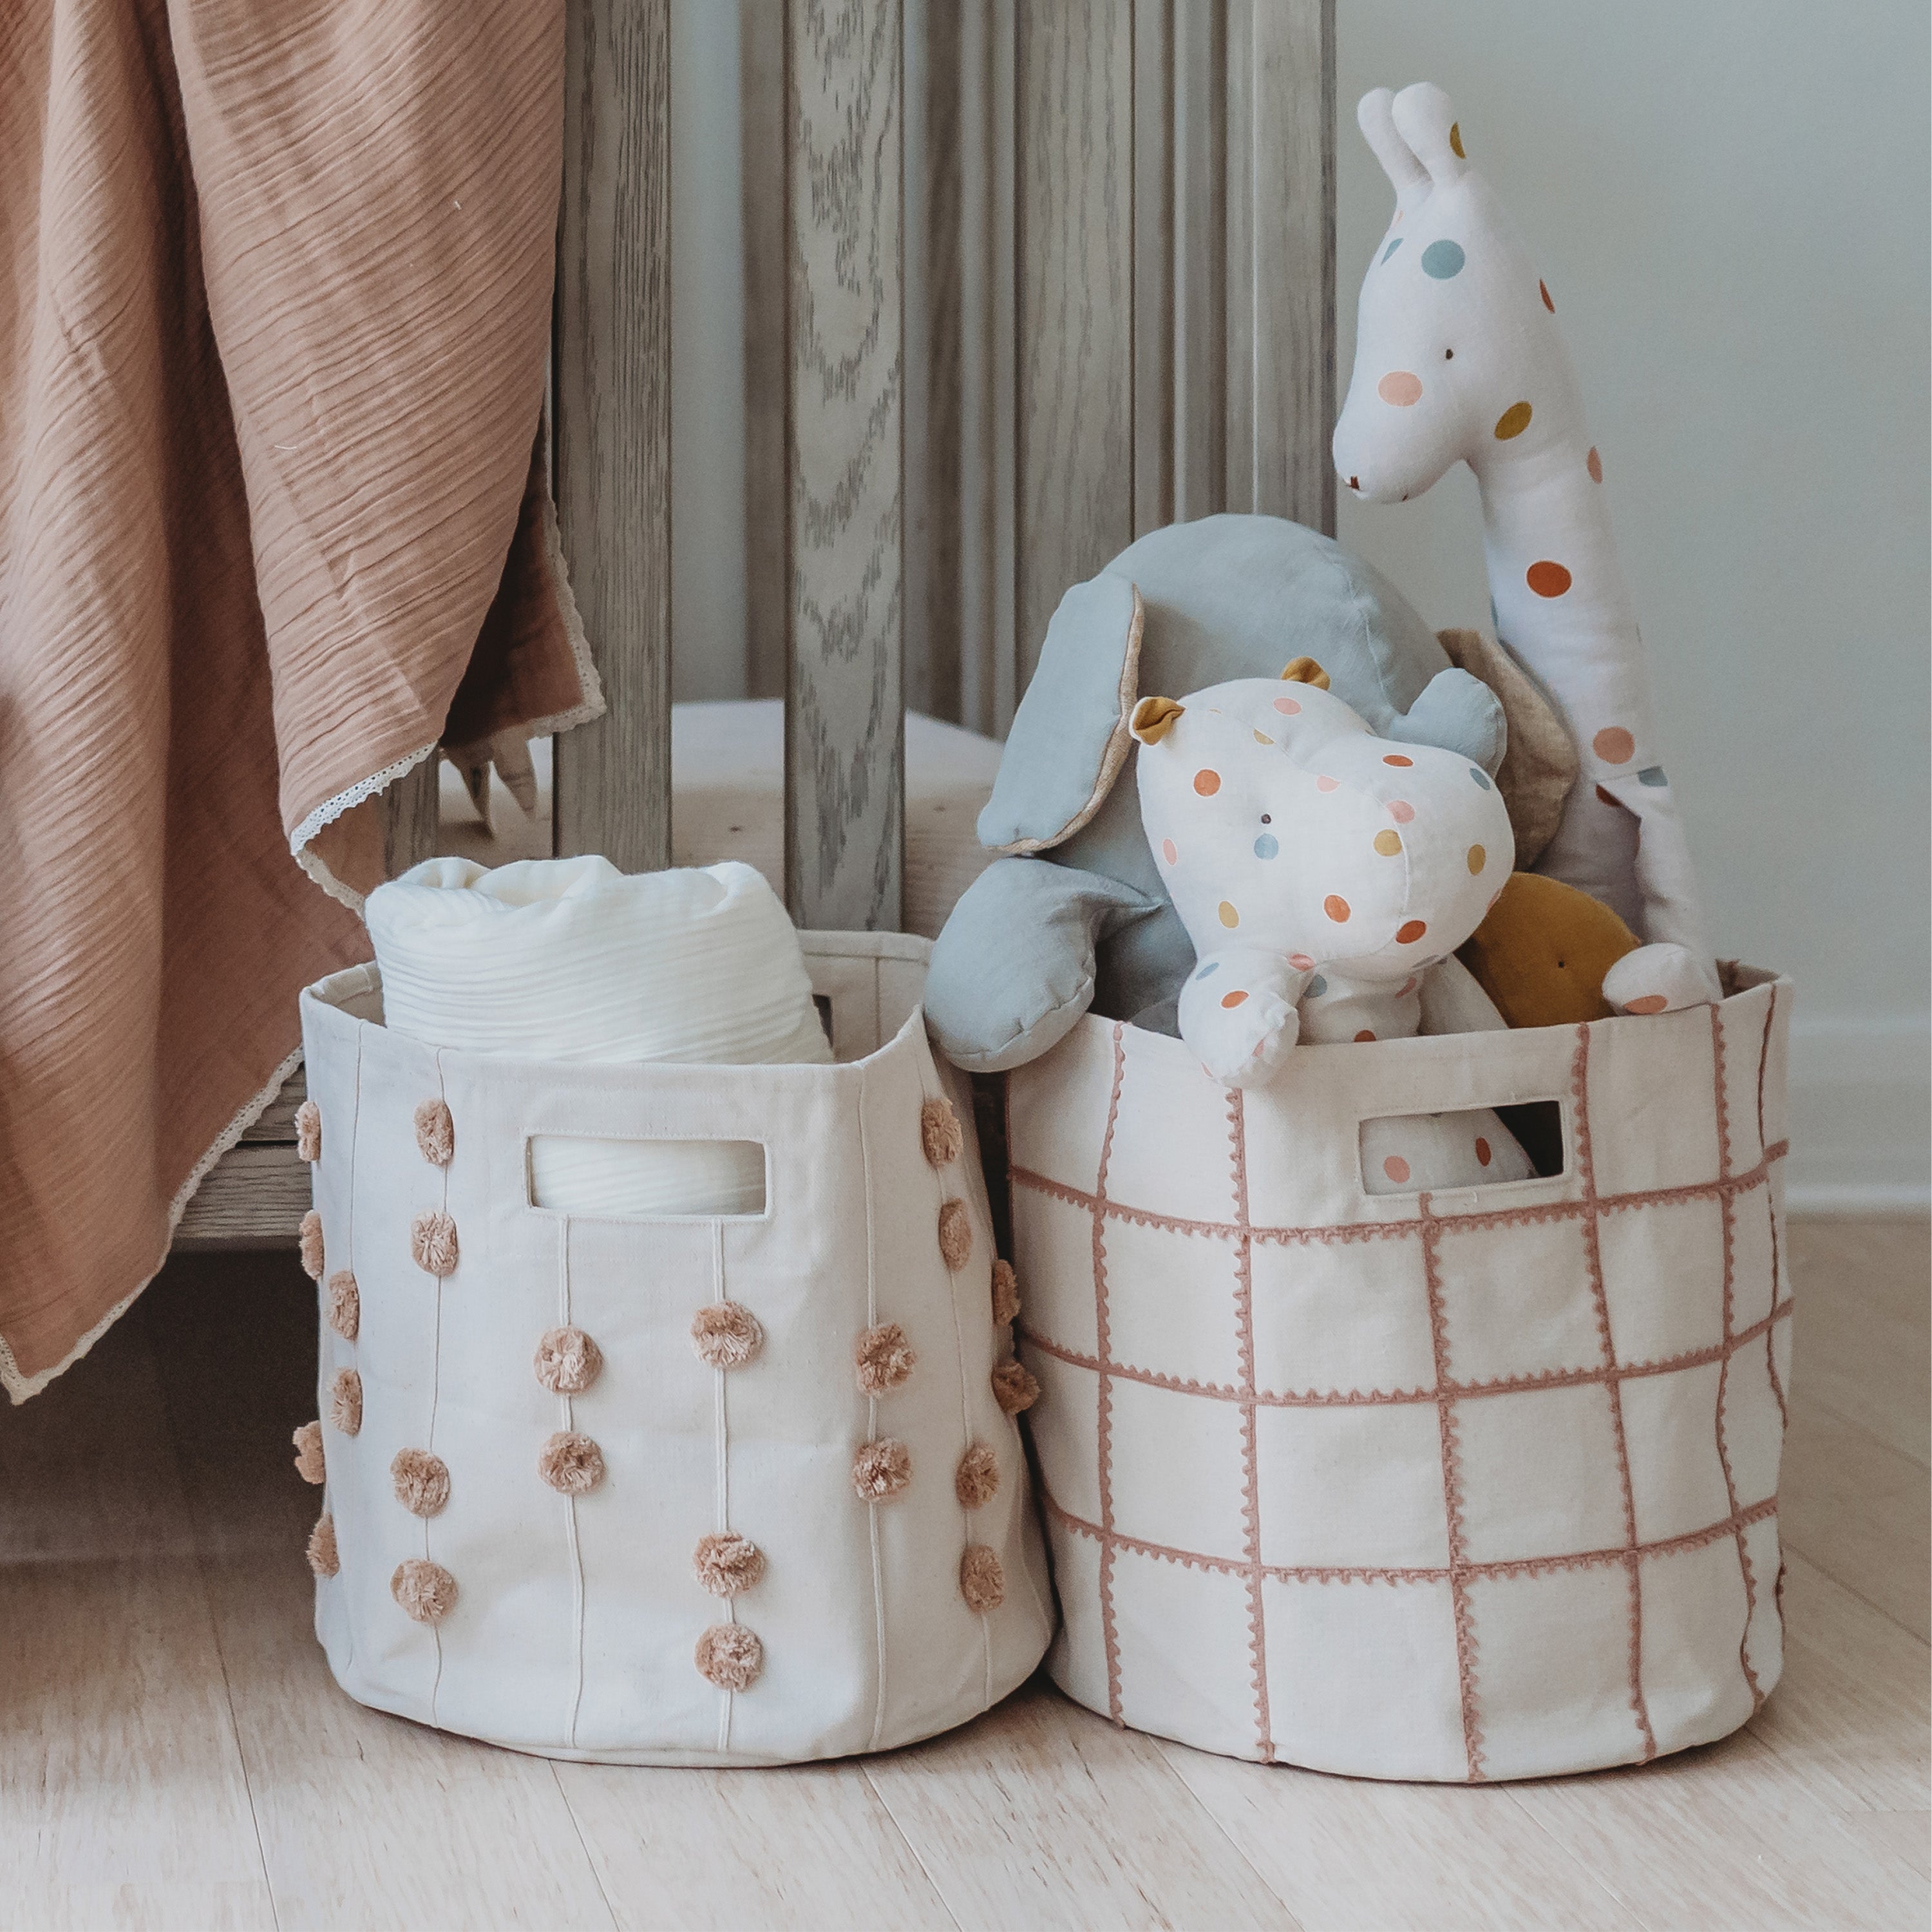 Two stylish Makemake Organics Storage Basket Mesh Lace - Pecan, filled with children's toys, including stuffed animals and soft blocks, situated next to draped pink fabric and a wooden backdrop.